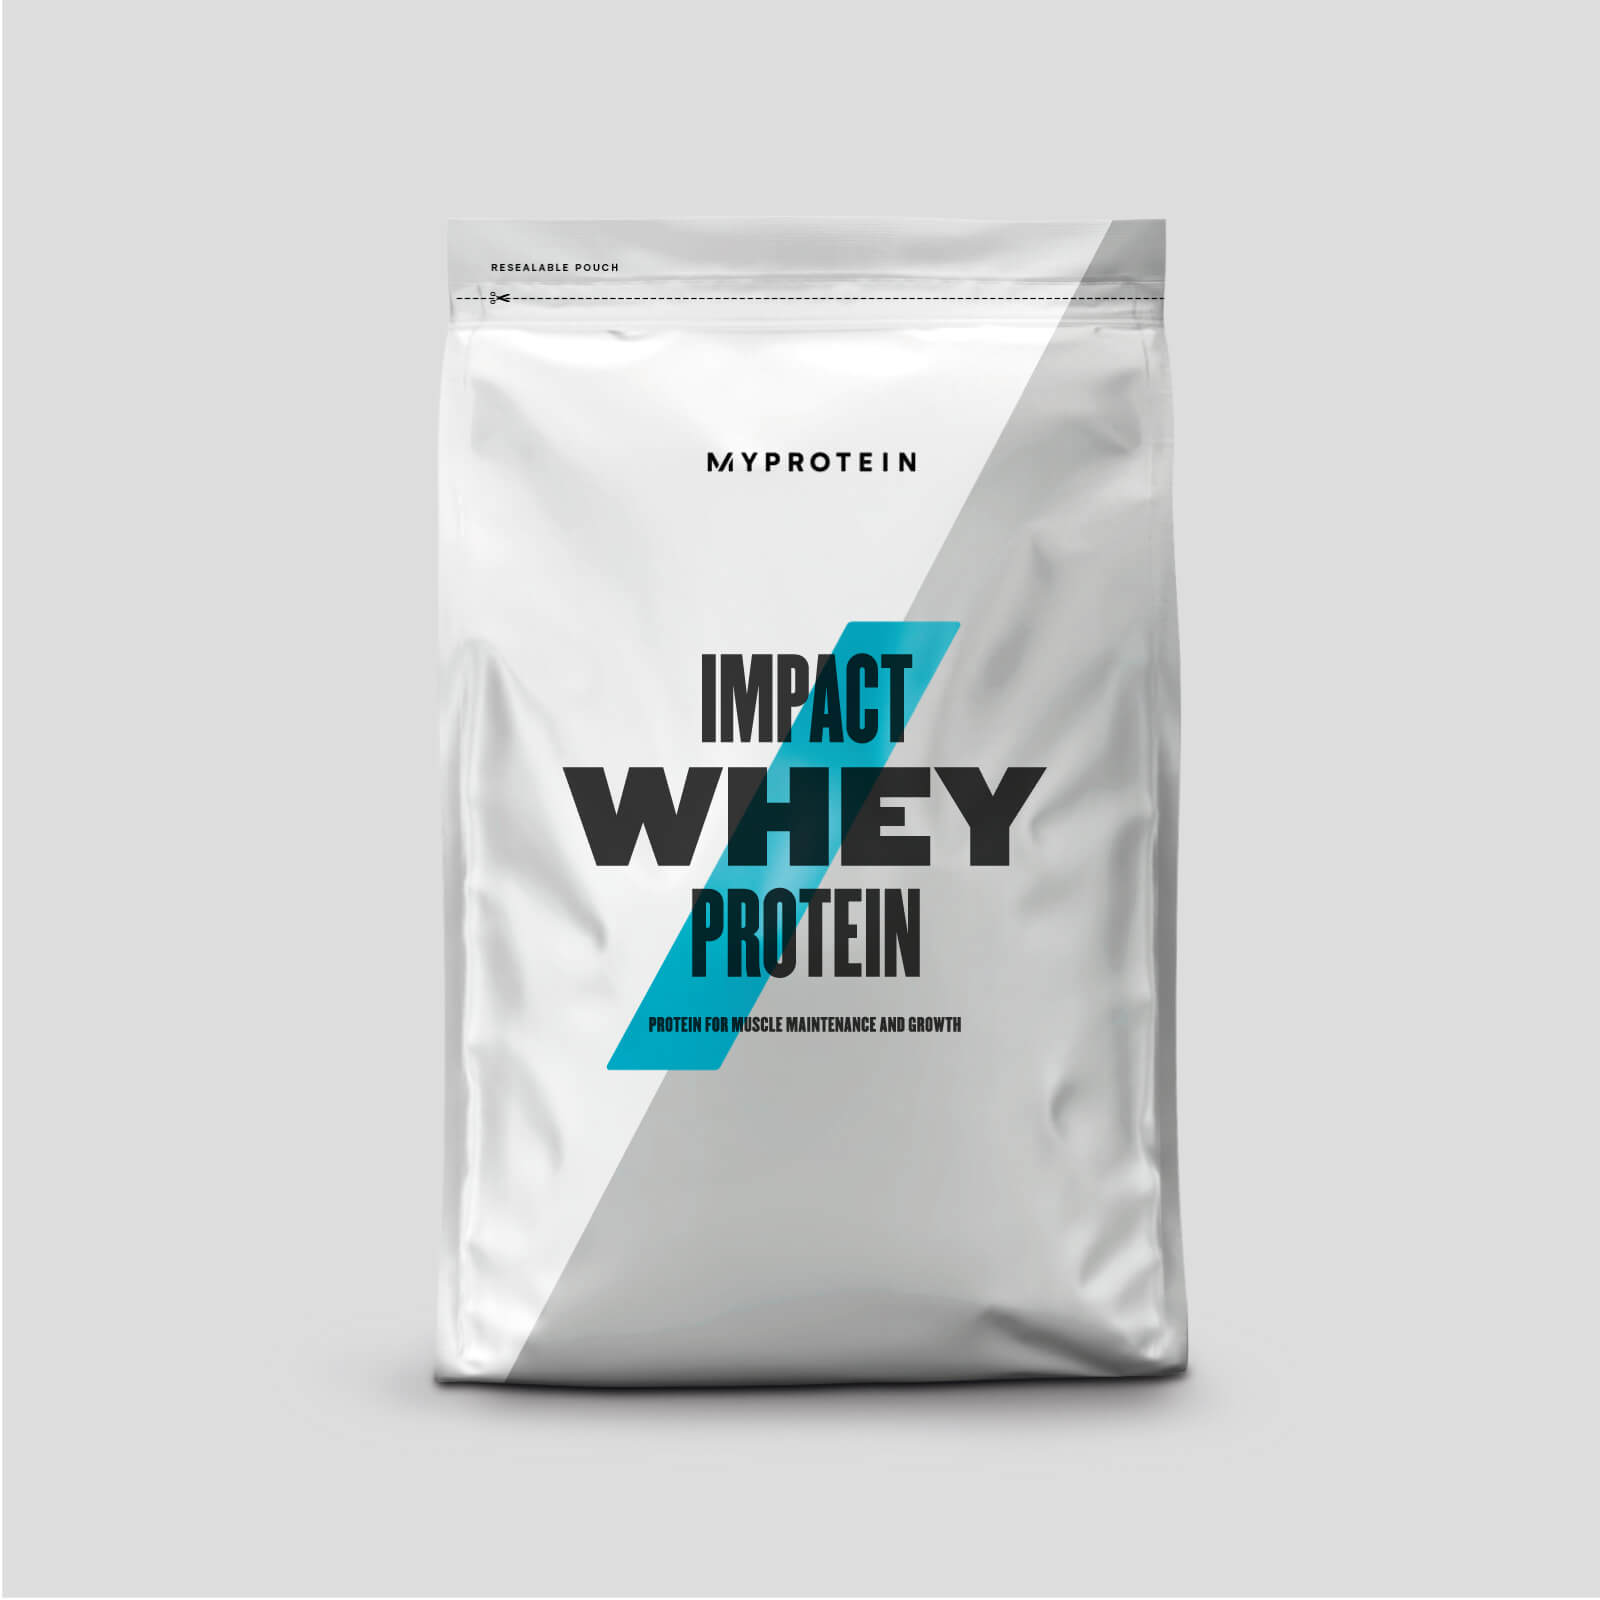 Myprotein Limited Edition Impact Whey Protein - 1kg - Summer Fruit